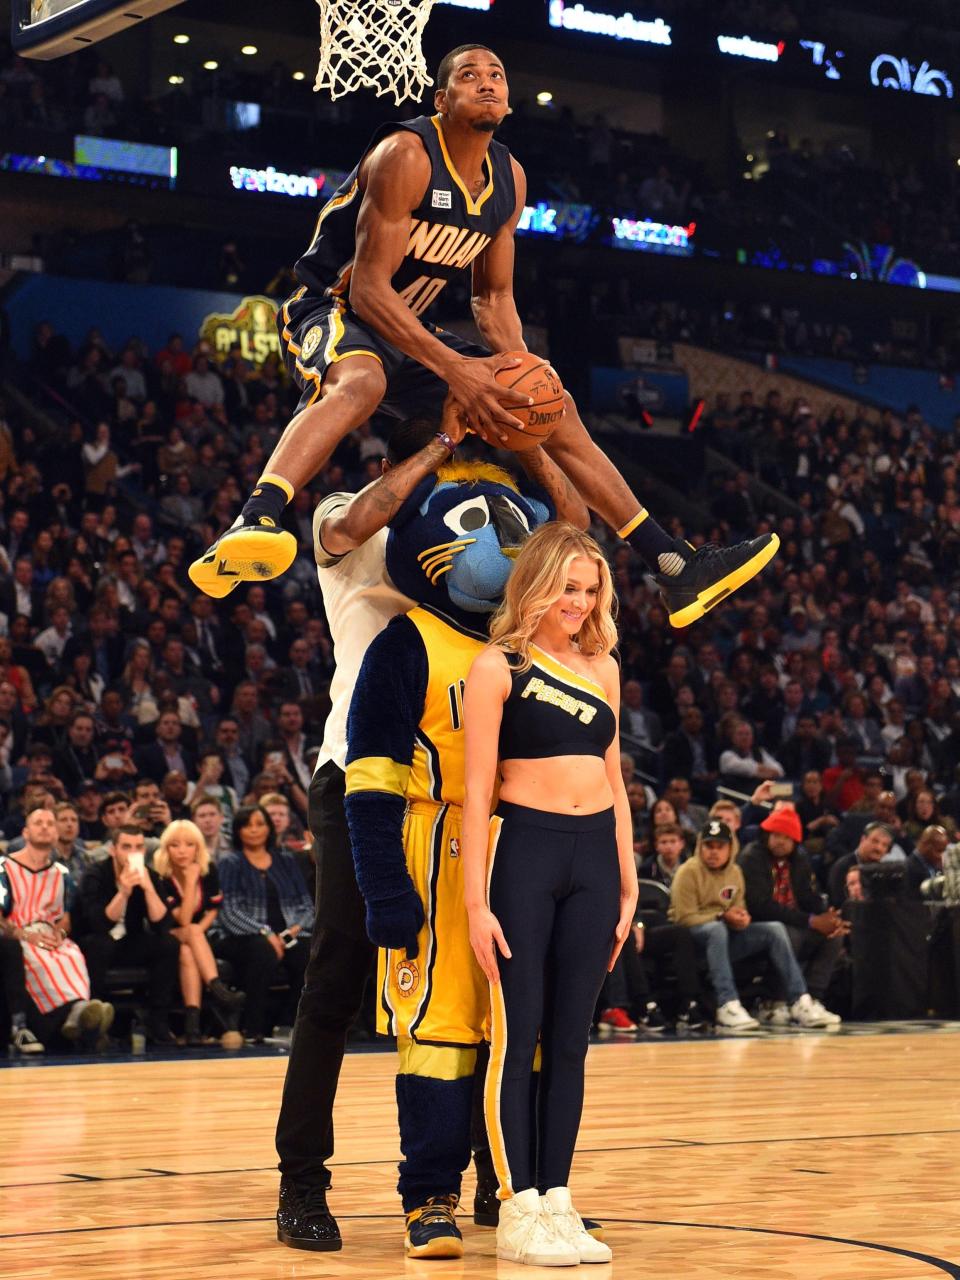 Indiana Pacers forward Glenn Robinson III leaps over teammate Paul George, mascot Boomer and Pacemate Kayla Noel to win this year's NBA dunk contest.